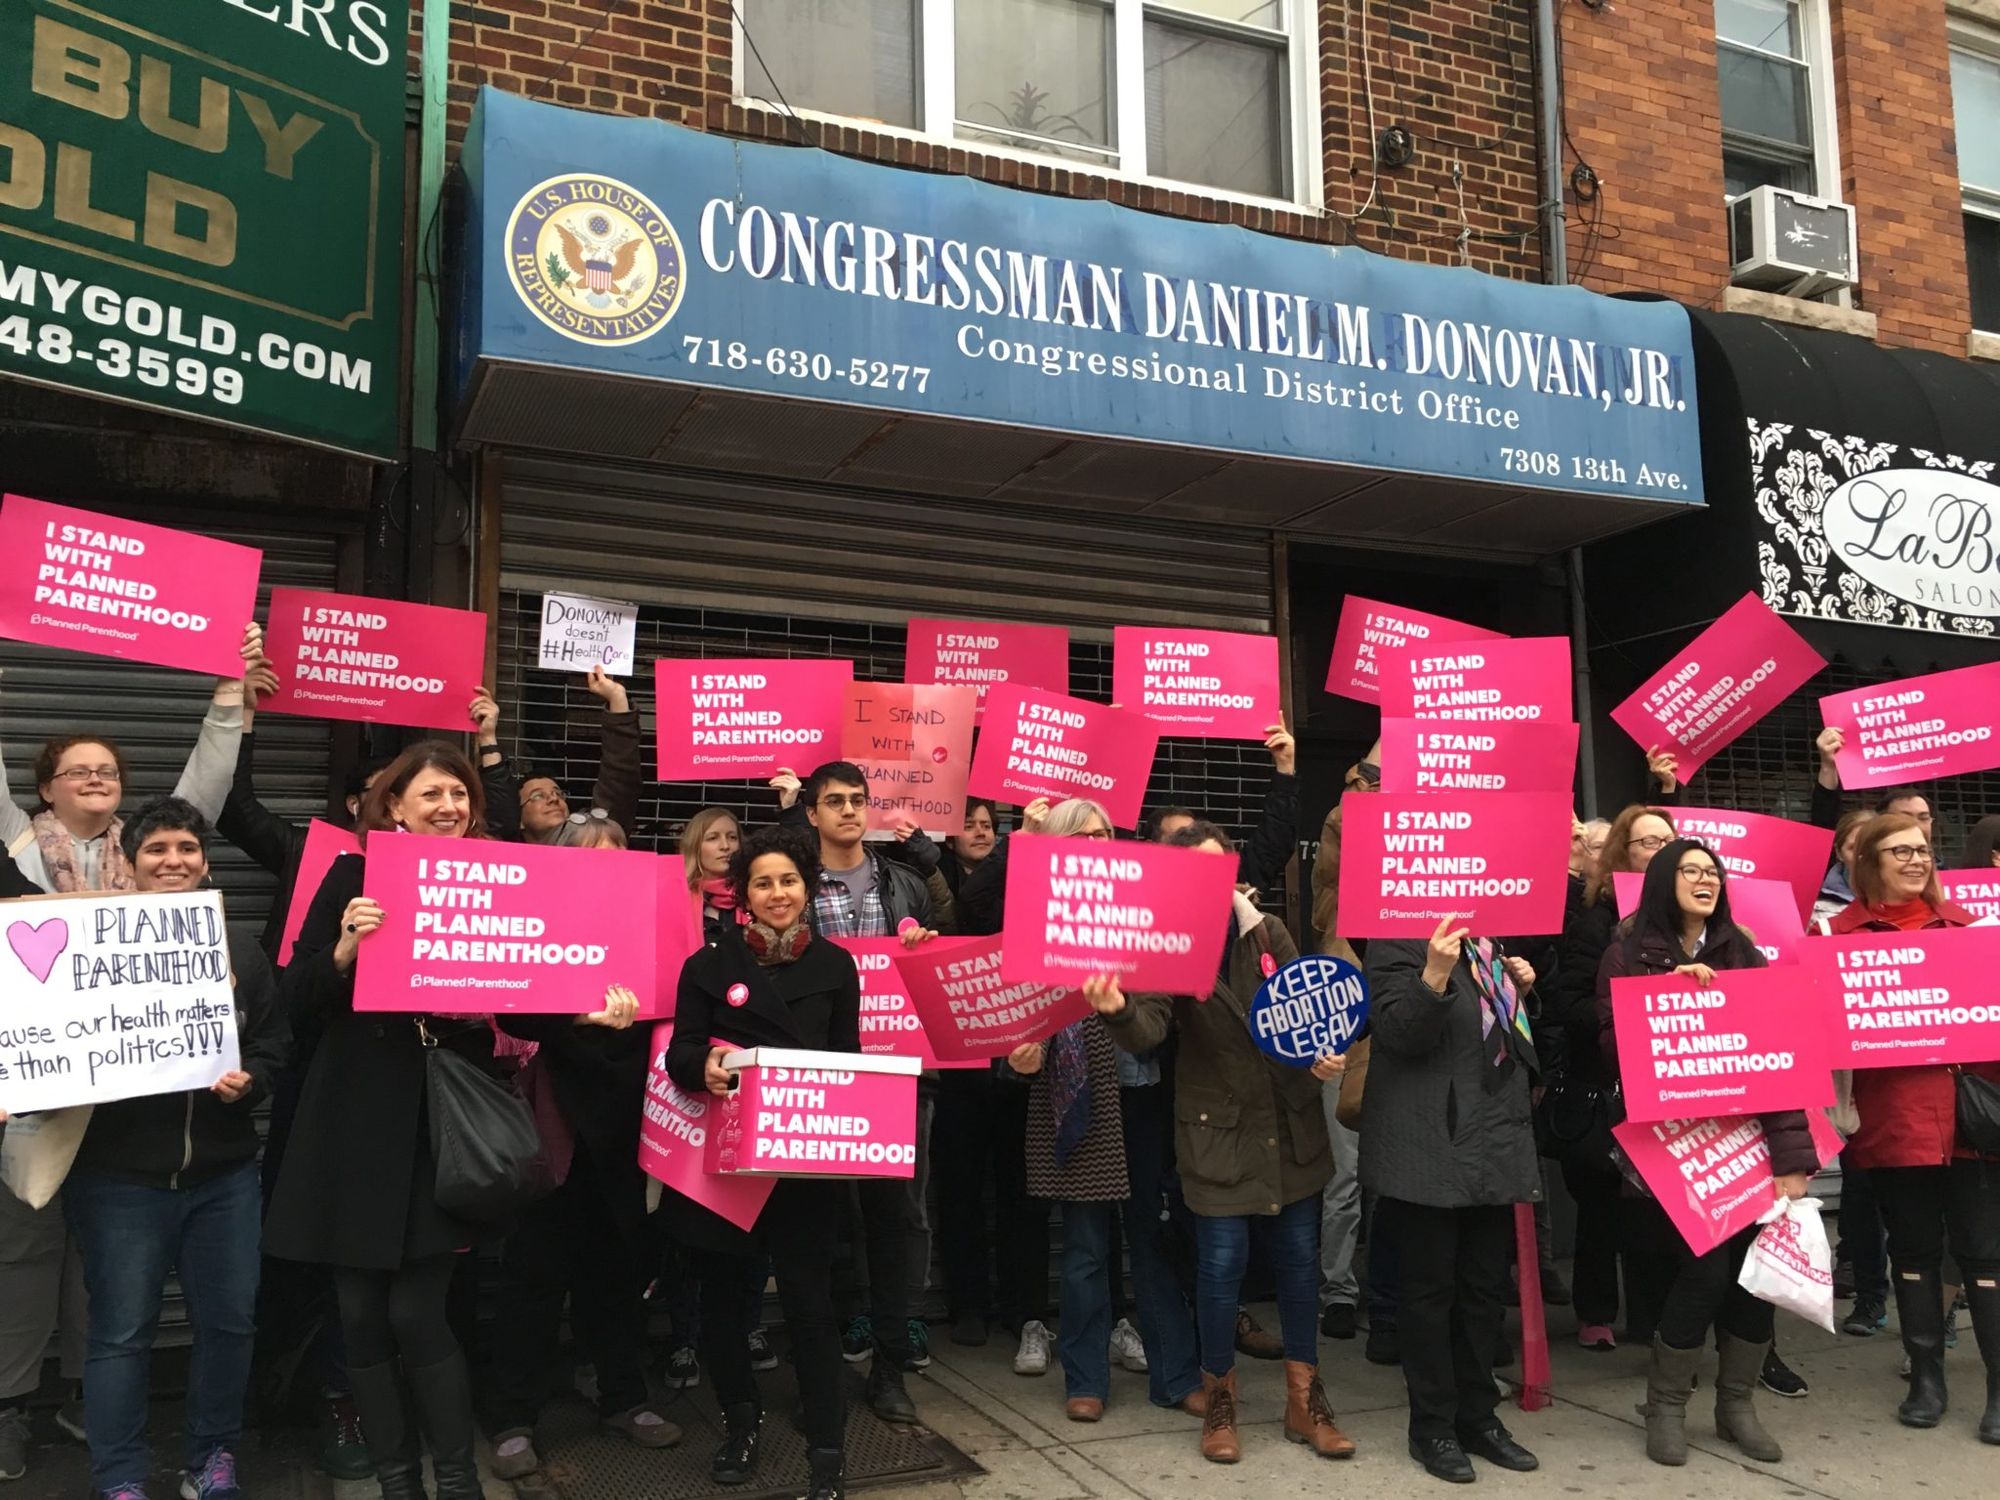 Activists Rally For Planned Parenthood While Donovan Decides If He’ll Support ACA Replacement Plan